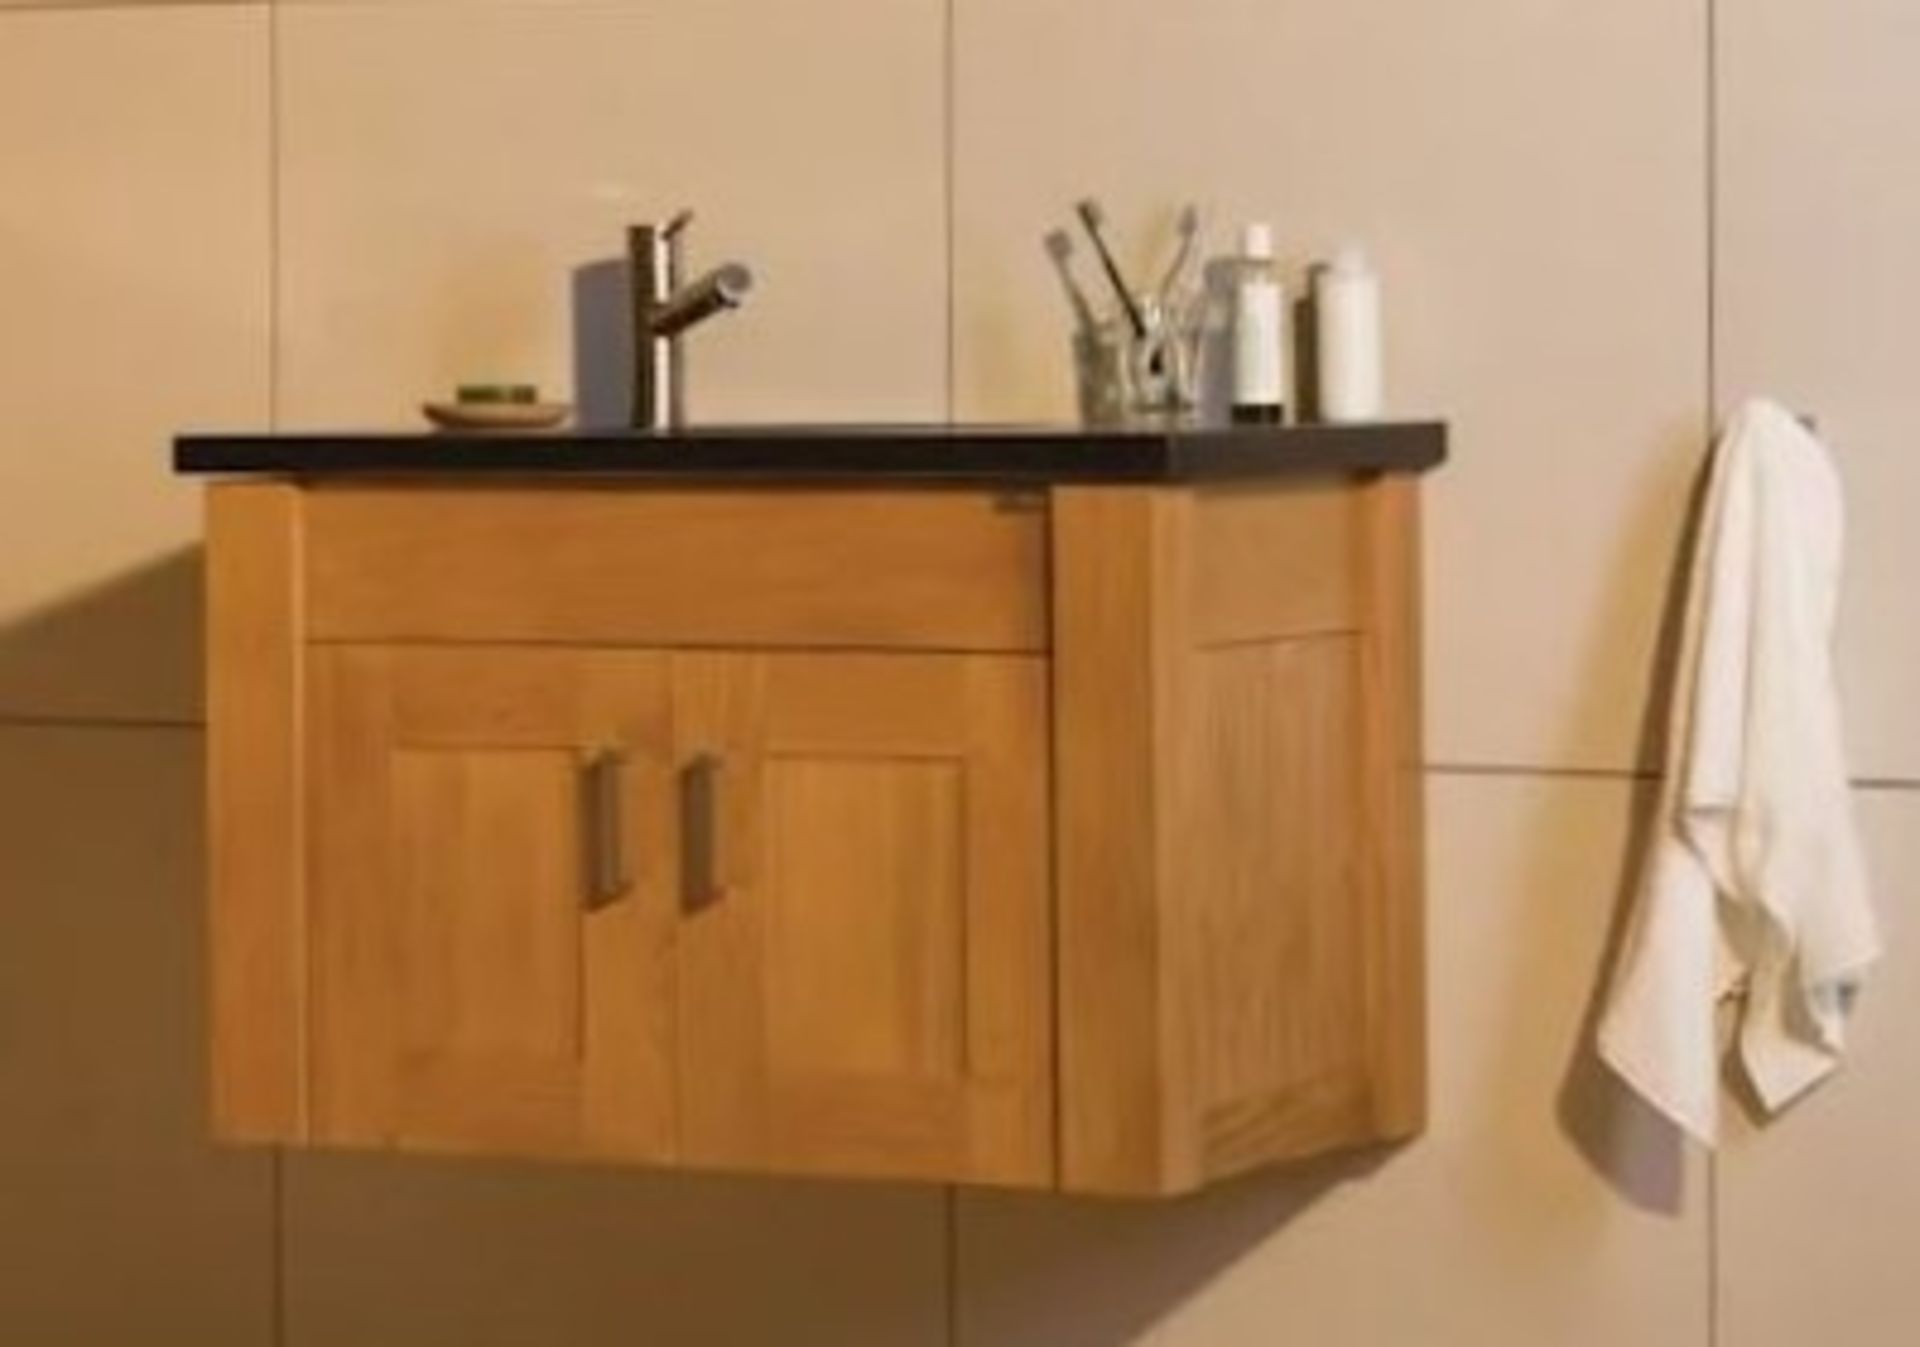 1 x Stonearth 'Venice' Wall Mounted 760mm Washstand - American Solid Oak - Original RRP £1,169